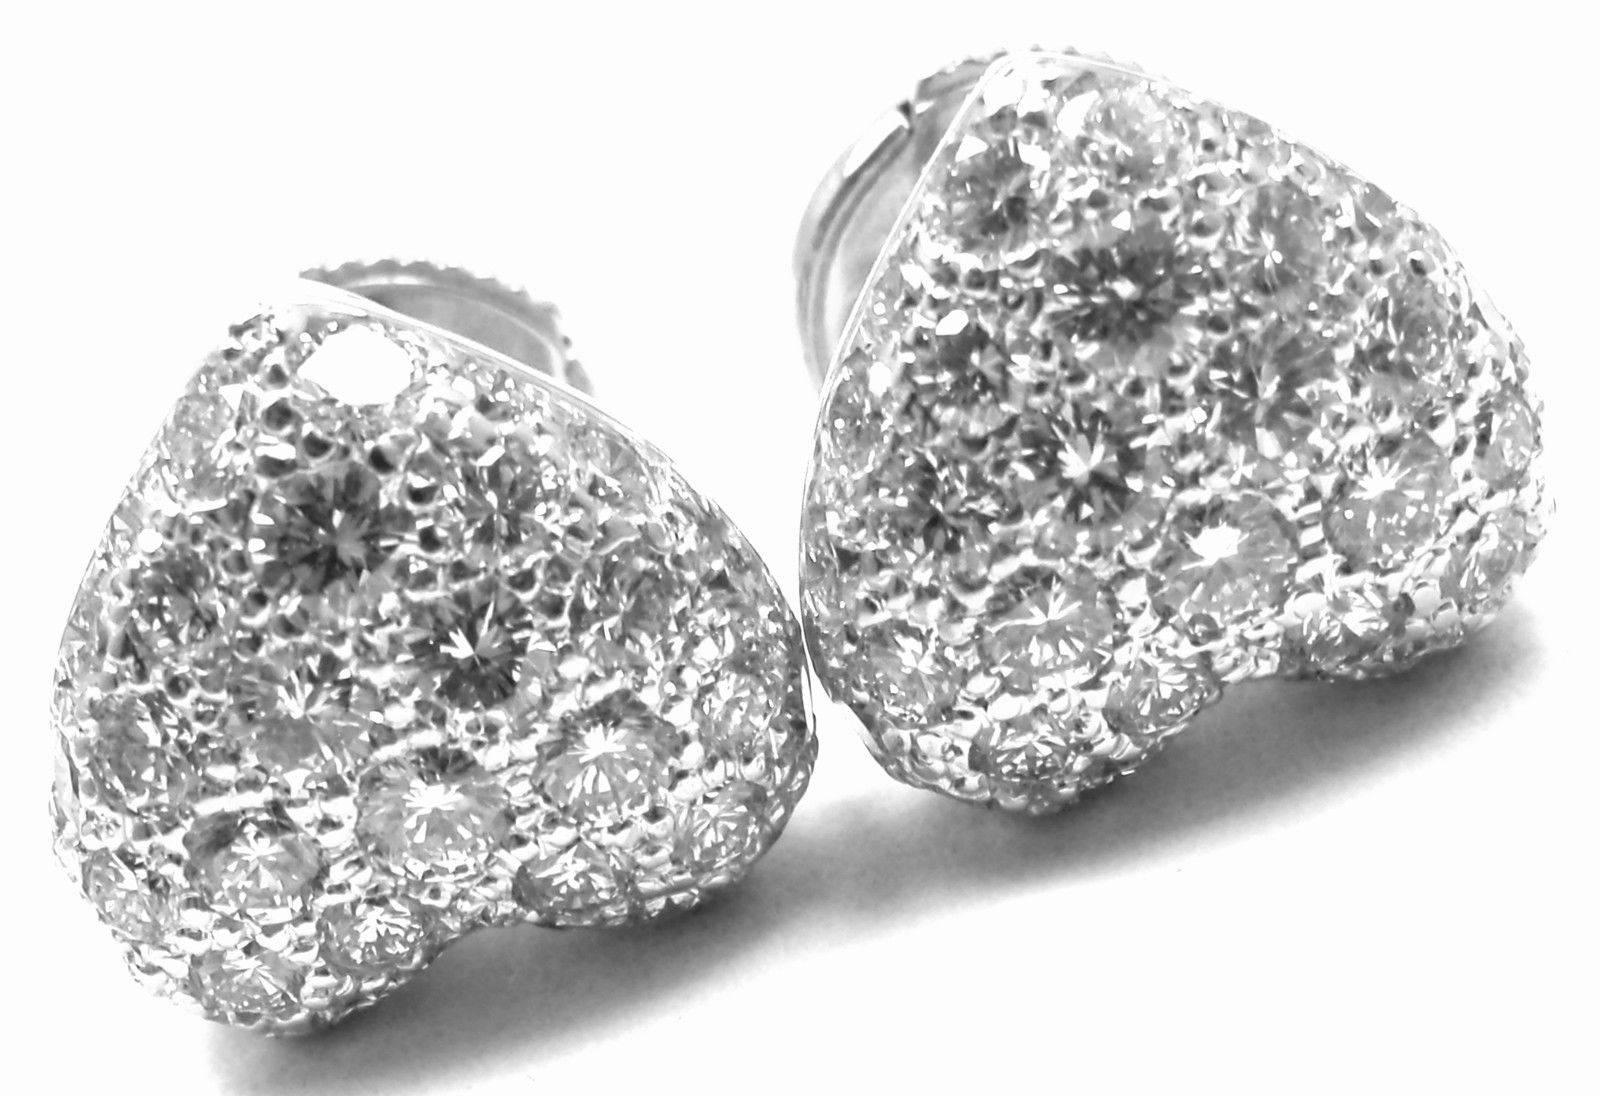 18k White Gold Diamond Heart Earrings by Cartier. 
With Round brilliant cut diamonds total weight approx. 1.5ct. 
Diamonds VVS1 clarity, E color
These earrings come with original Cartier box.
***Earrings are made for pierced